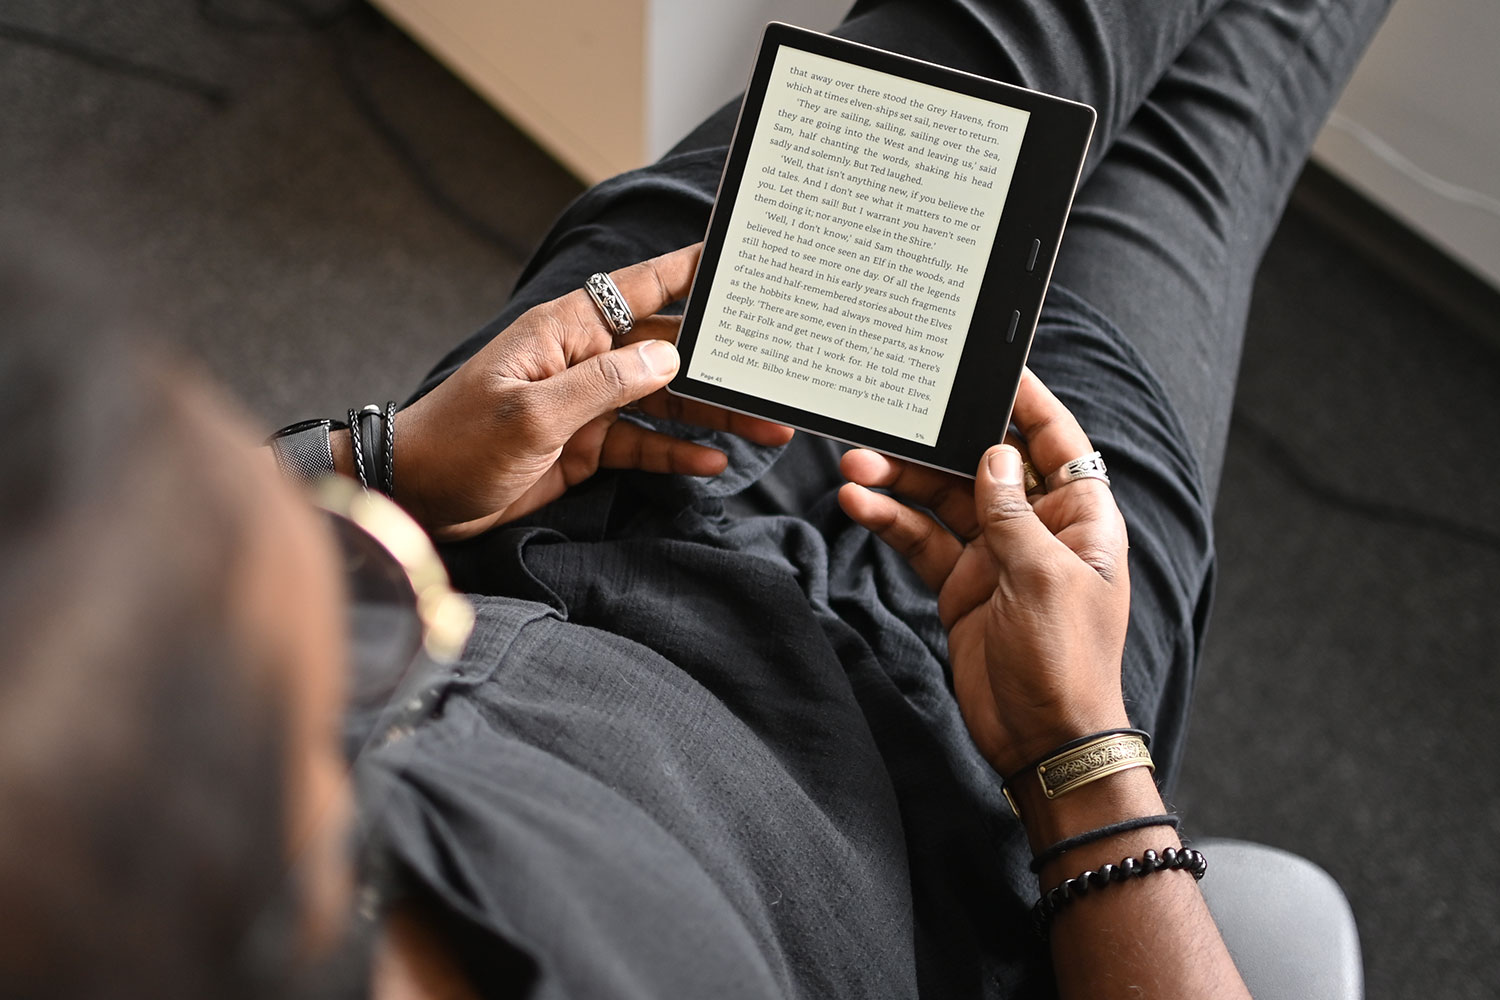 Kindle Oasis (2019) Review: USB-C Would Make This Perfect